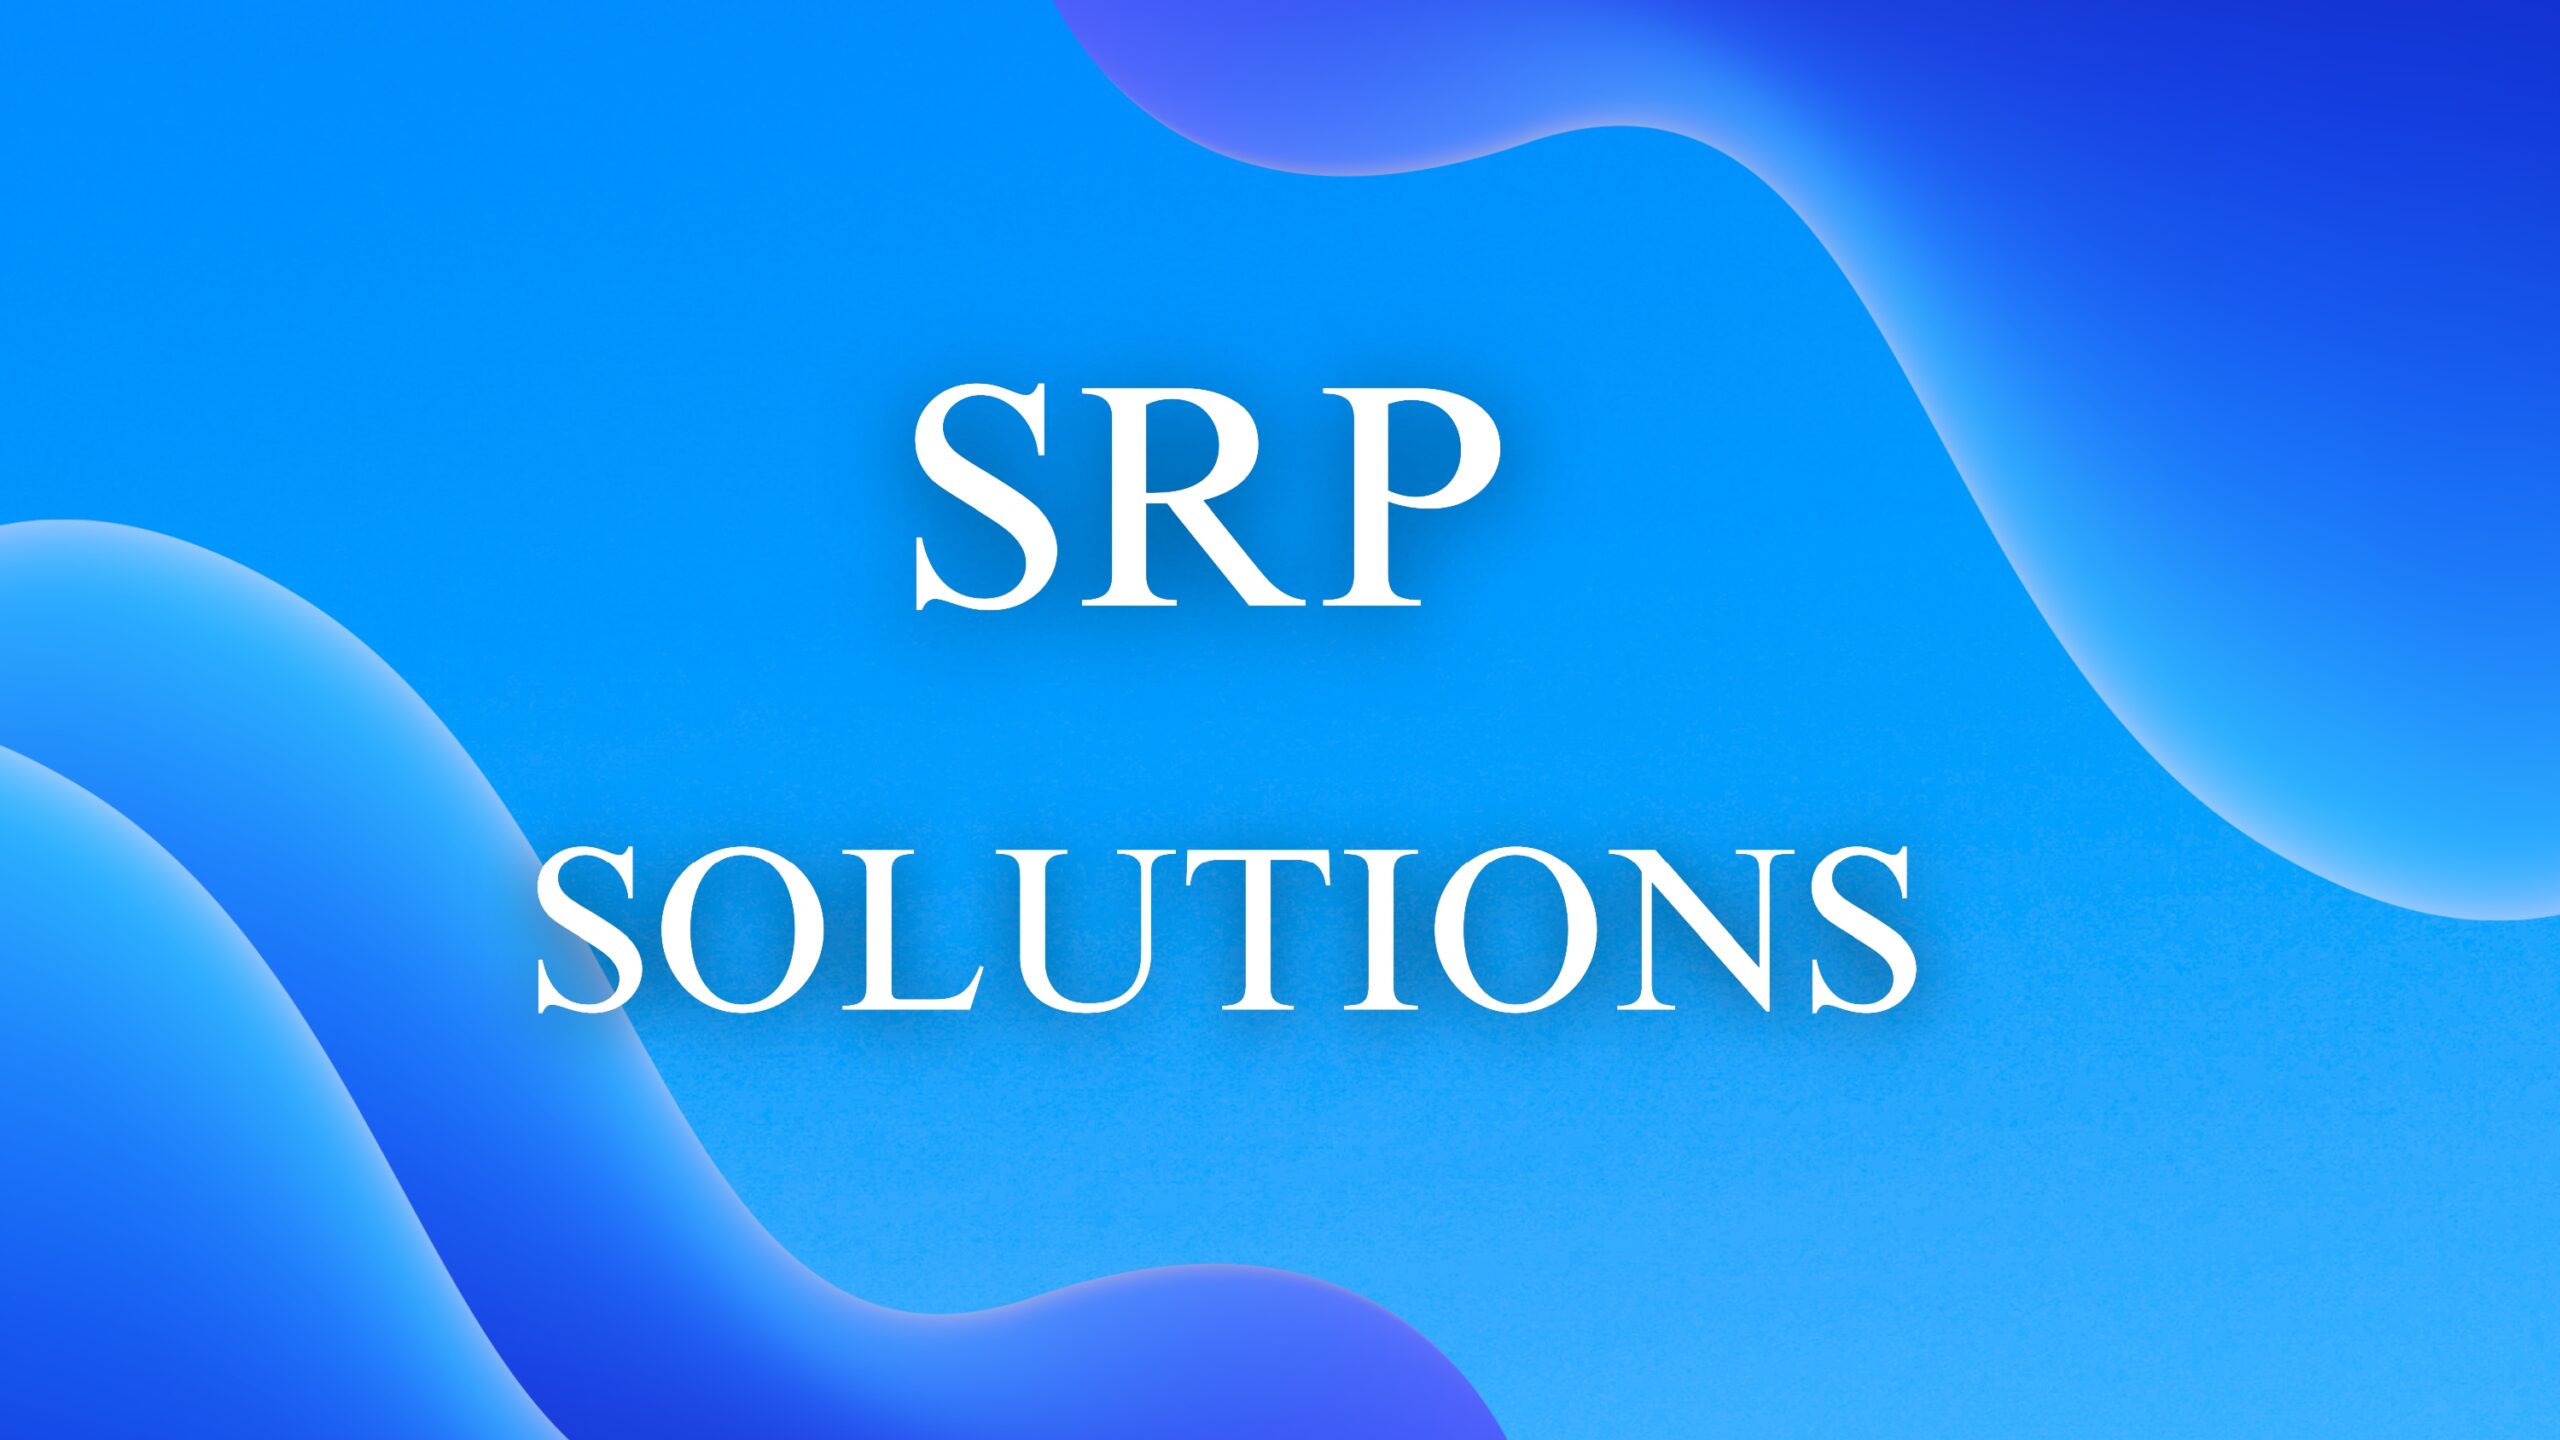 SRP SOLUTIONS